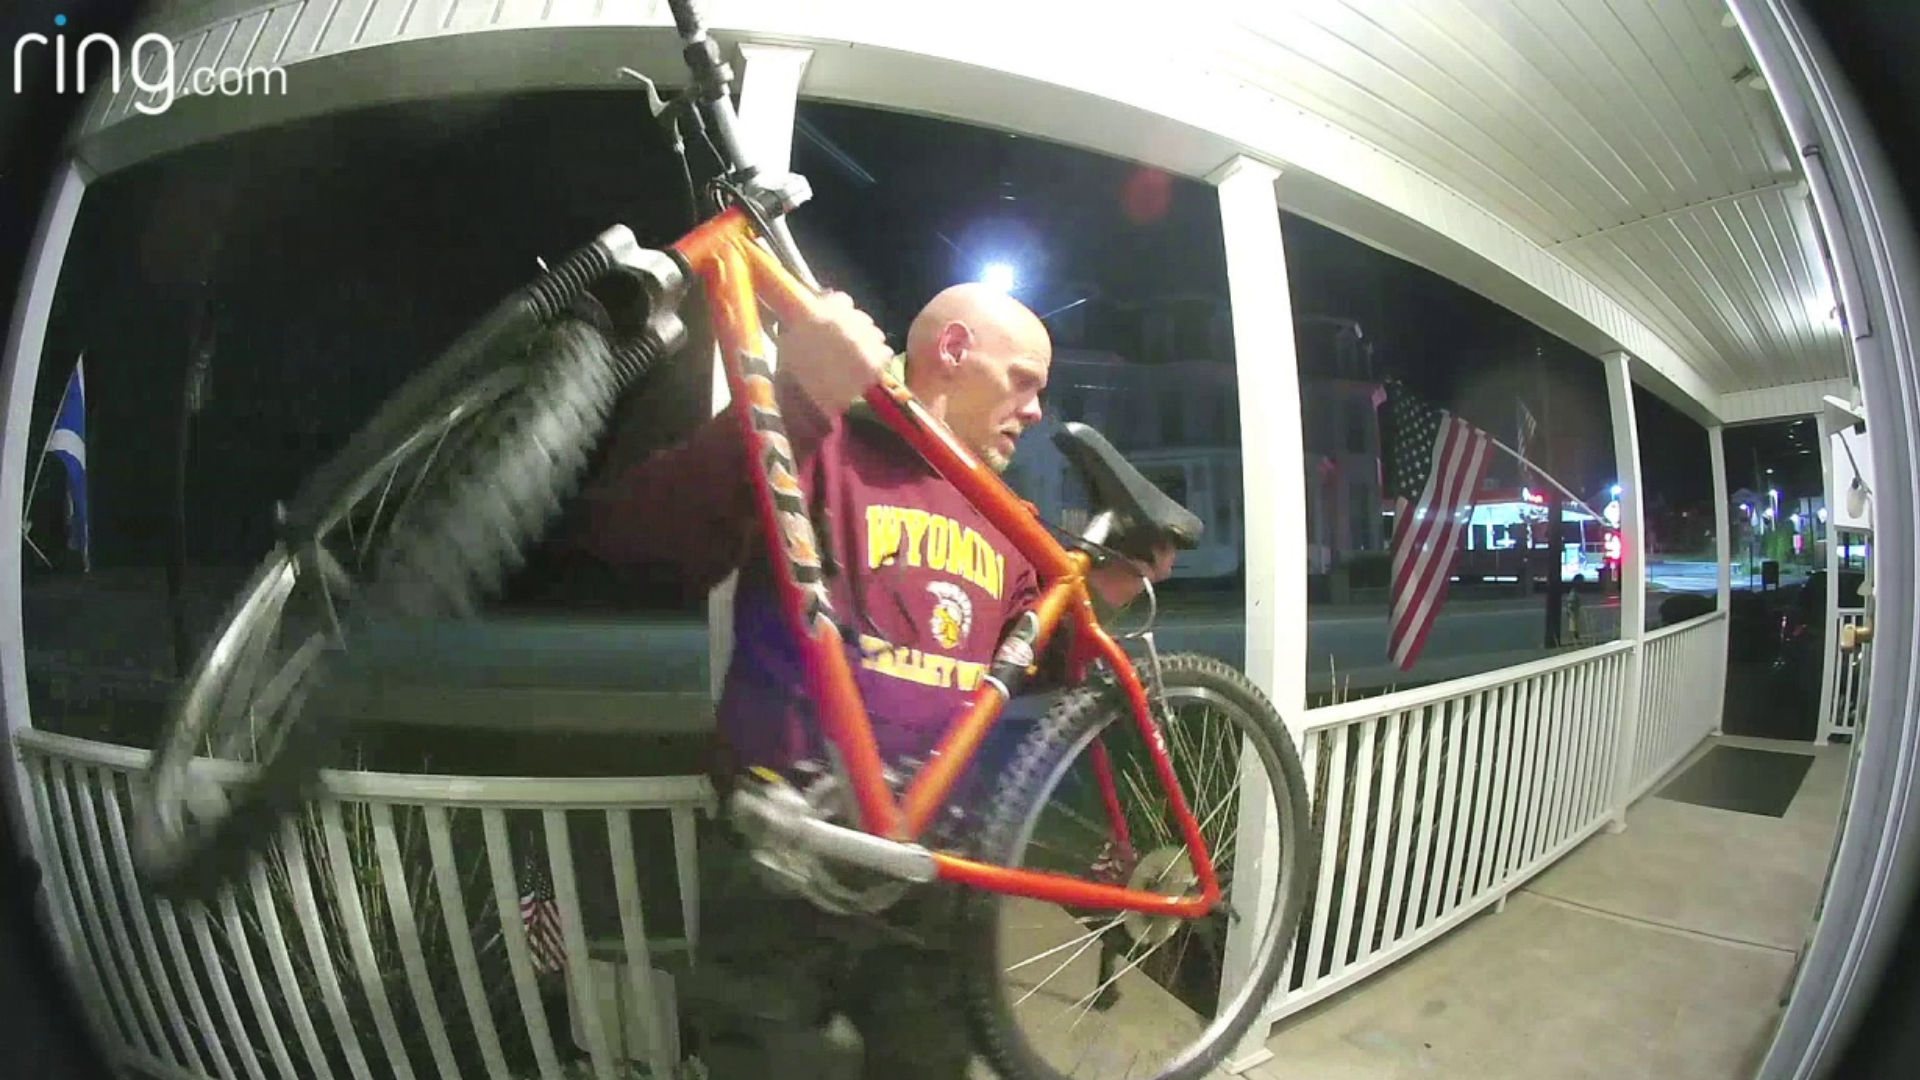 Police are looking for the person who stole a bike off a porch in Luzerne County.